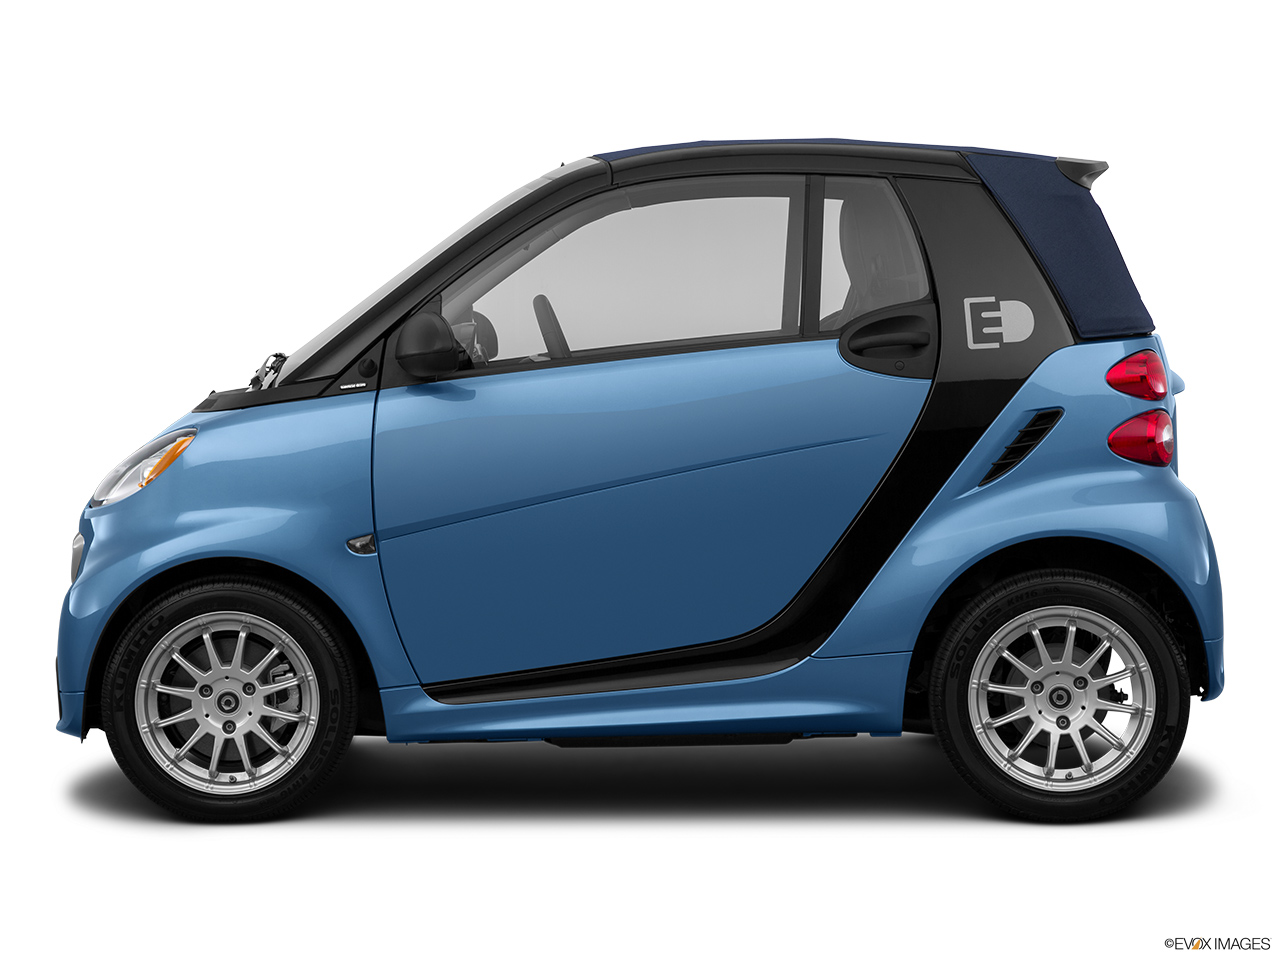 2014 Smart Fortwo Electric Drive Base Drivers side profile, convertible top up (convertibles only). 